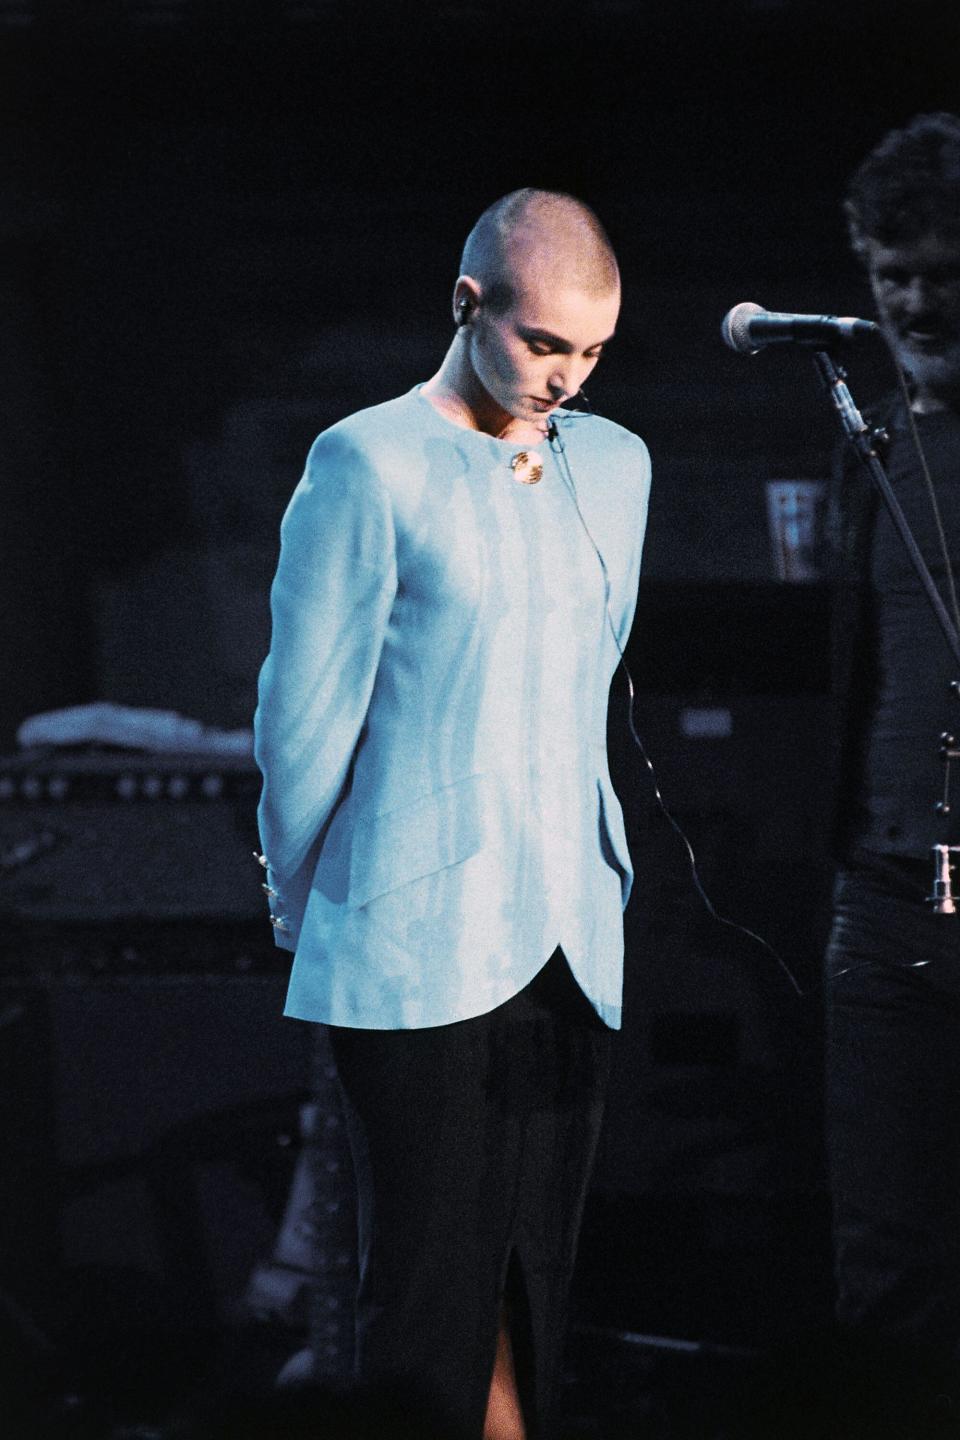 Irish singer Sinead O’Connor stands alone amidst boos on Oct. 16, 1992 in New York City, United States, reacting to her being on stage in response to her tearing up of a photo to Pope John Paul II on U.S. television. O’Connor was on stage at Bob Dylan’s 30th anniversary celebration of his first Columbia Records album’s release. O’Connor emotionally left the stage without performing. (AP Photo/Ron Frehm)